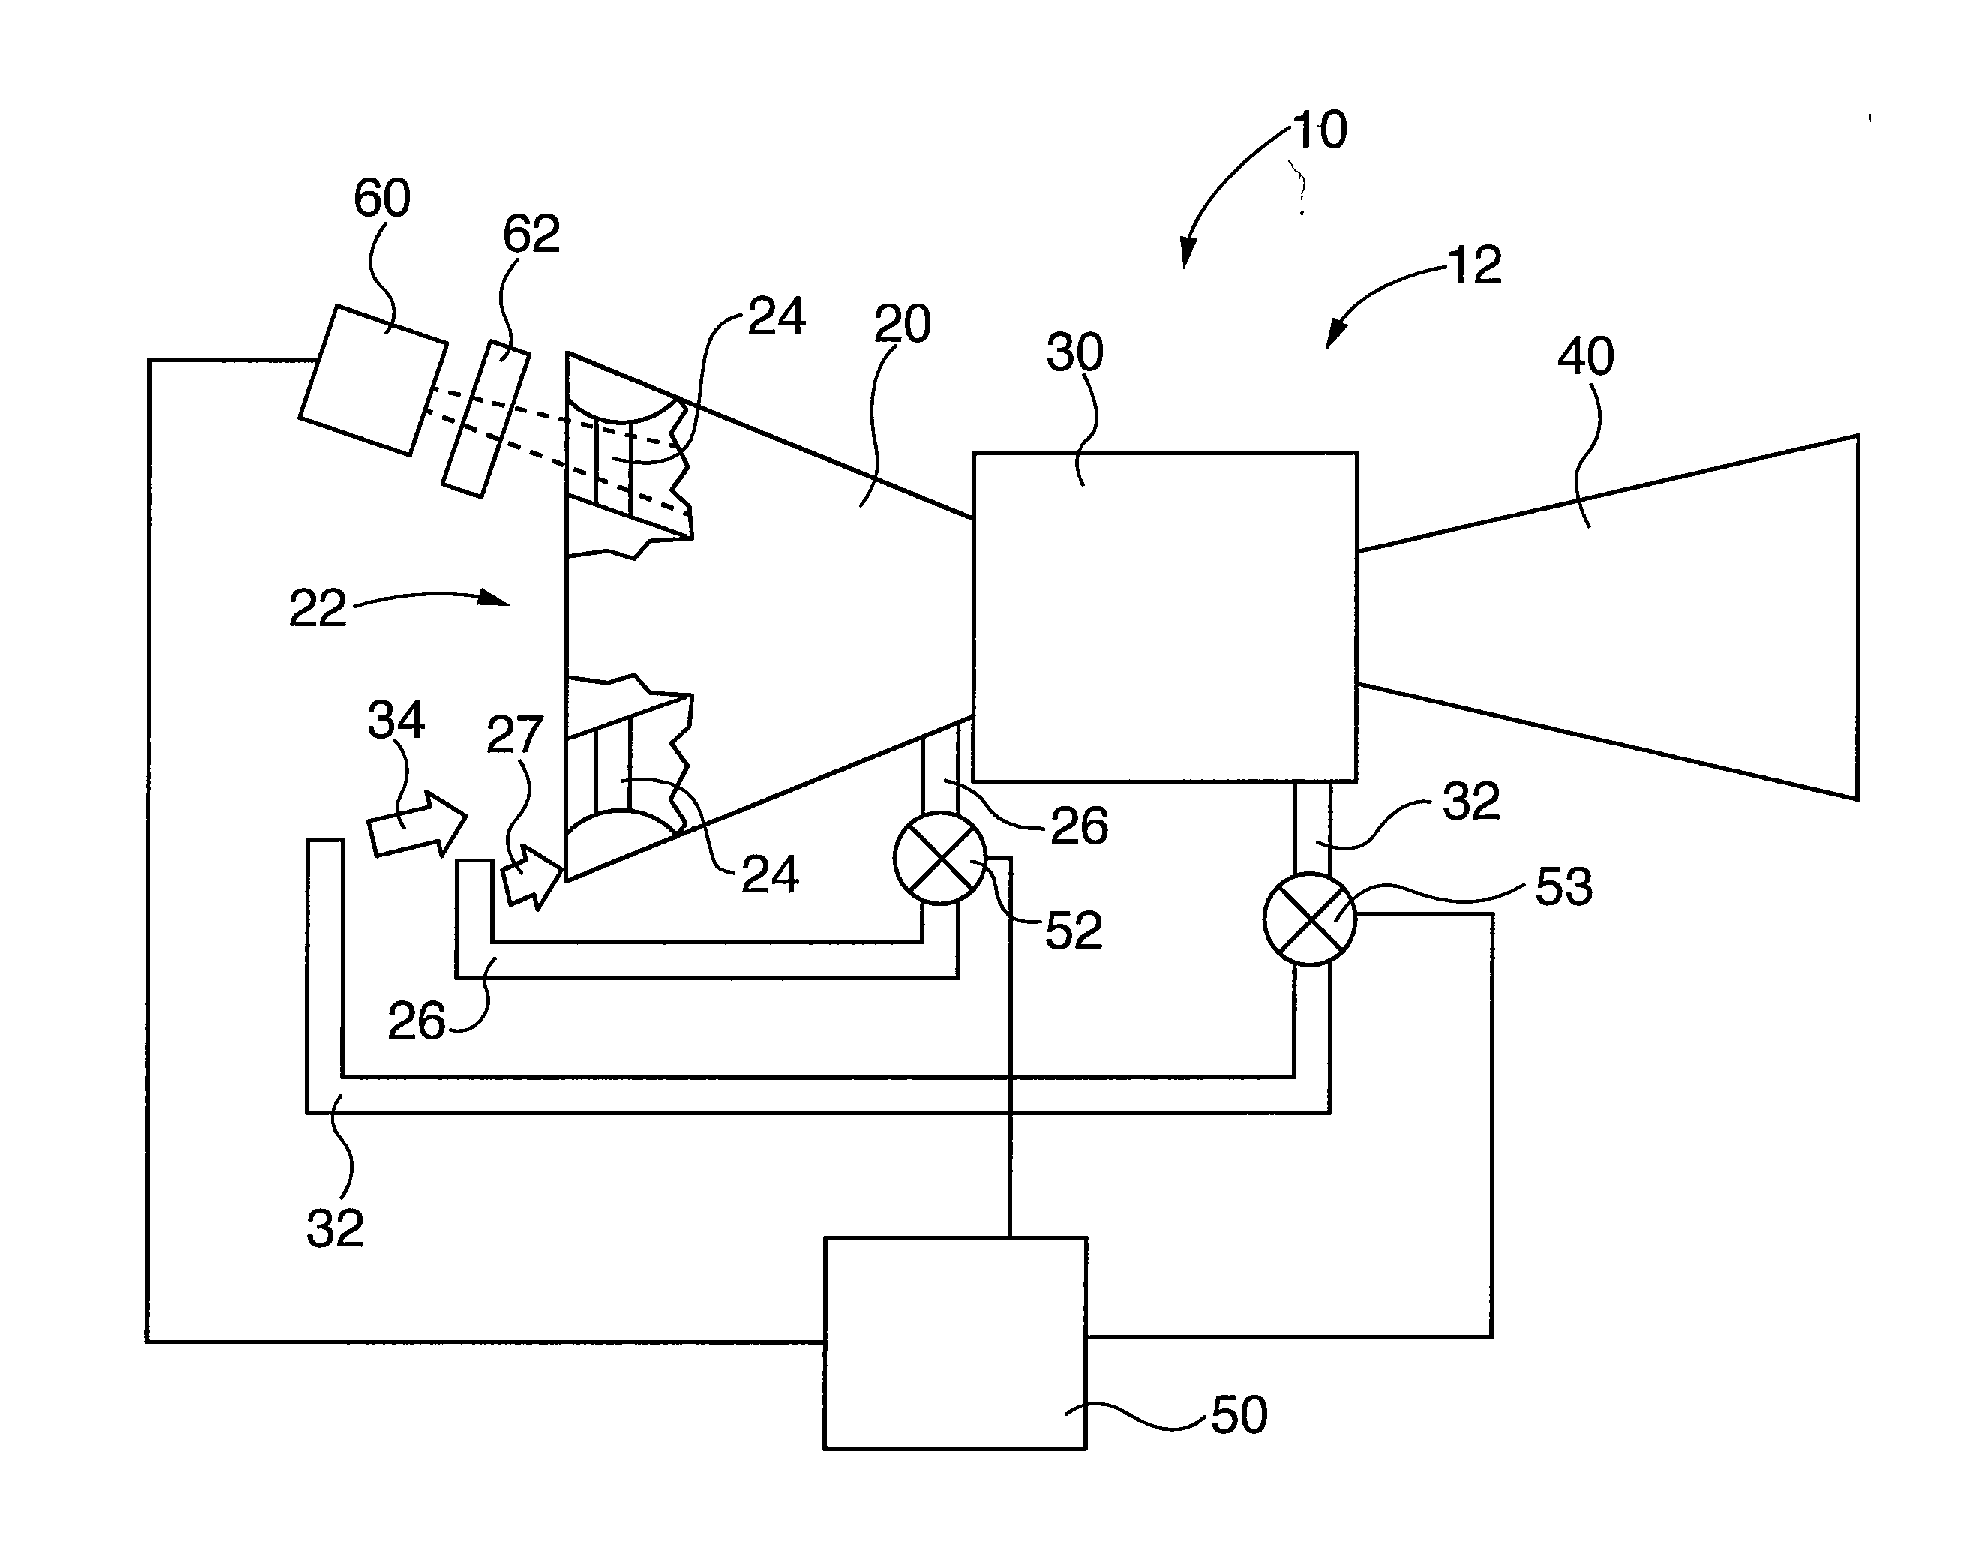 System and method for controlling ice formation on gas turbine inlet guide vanes